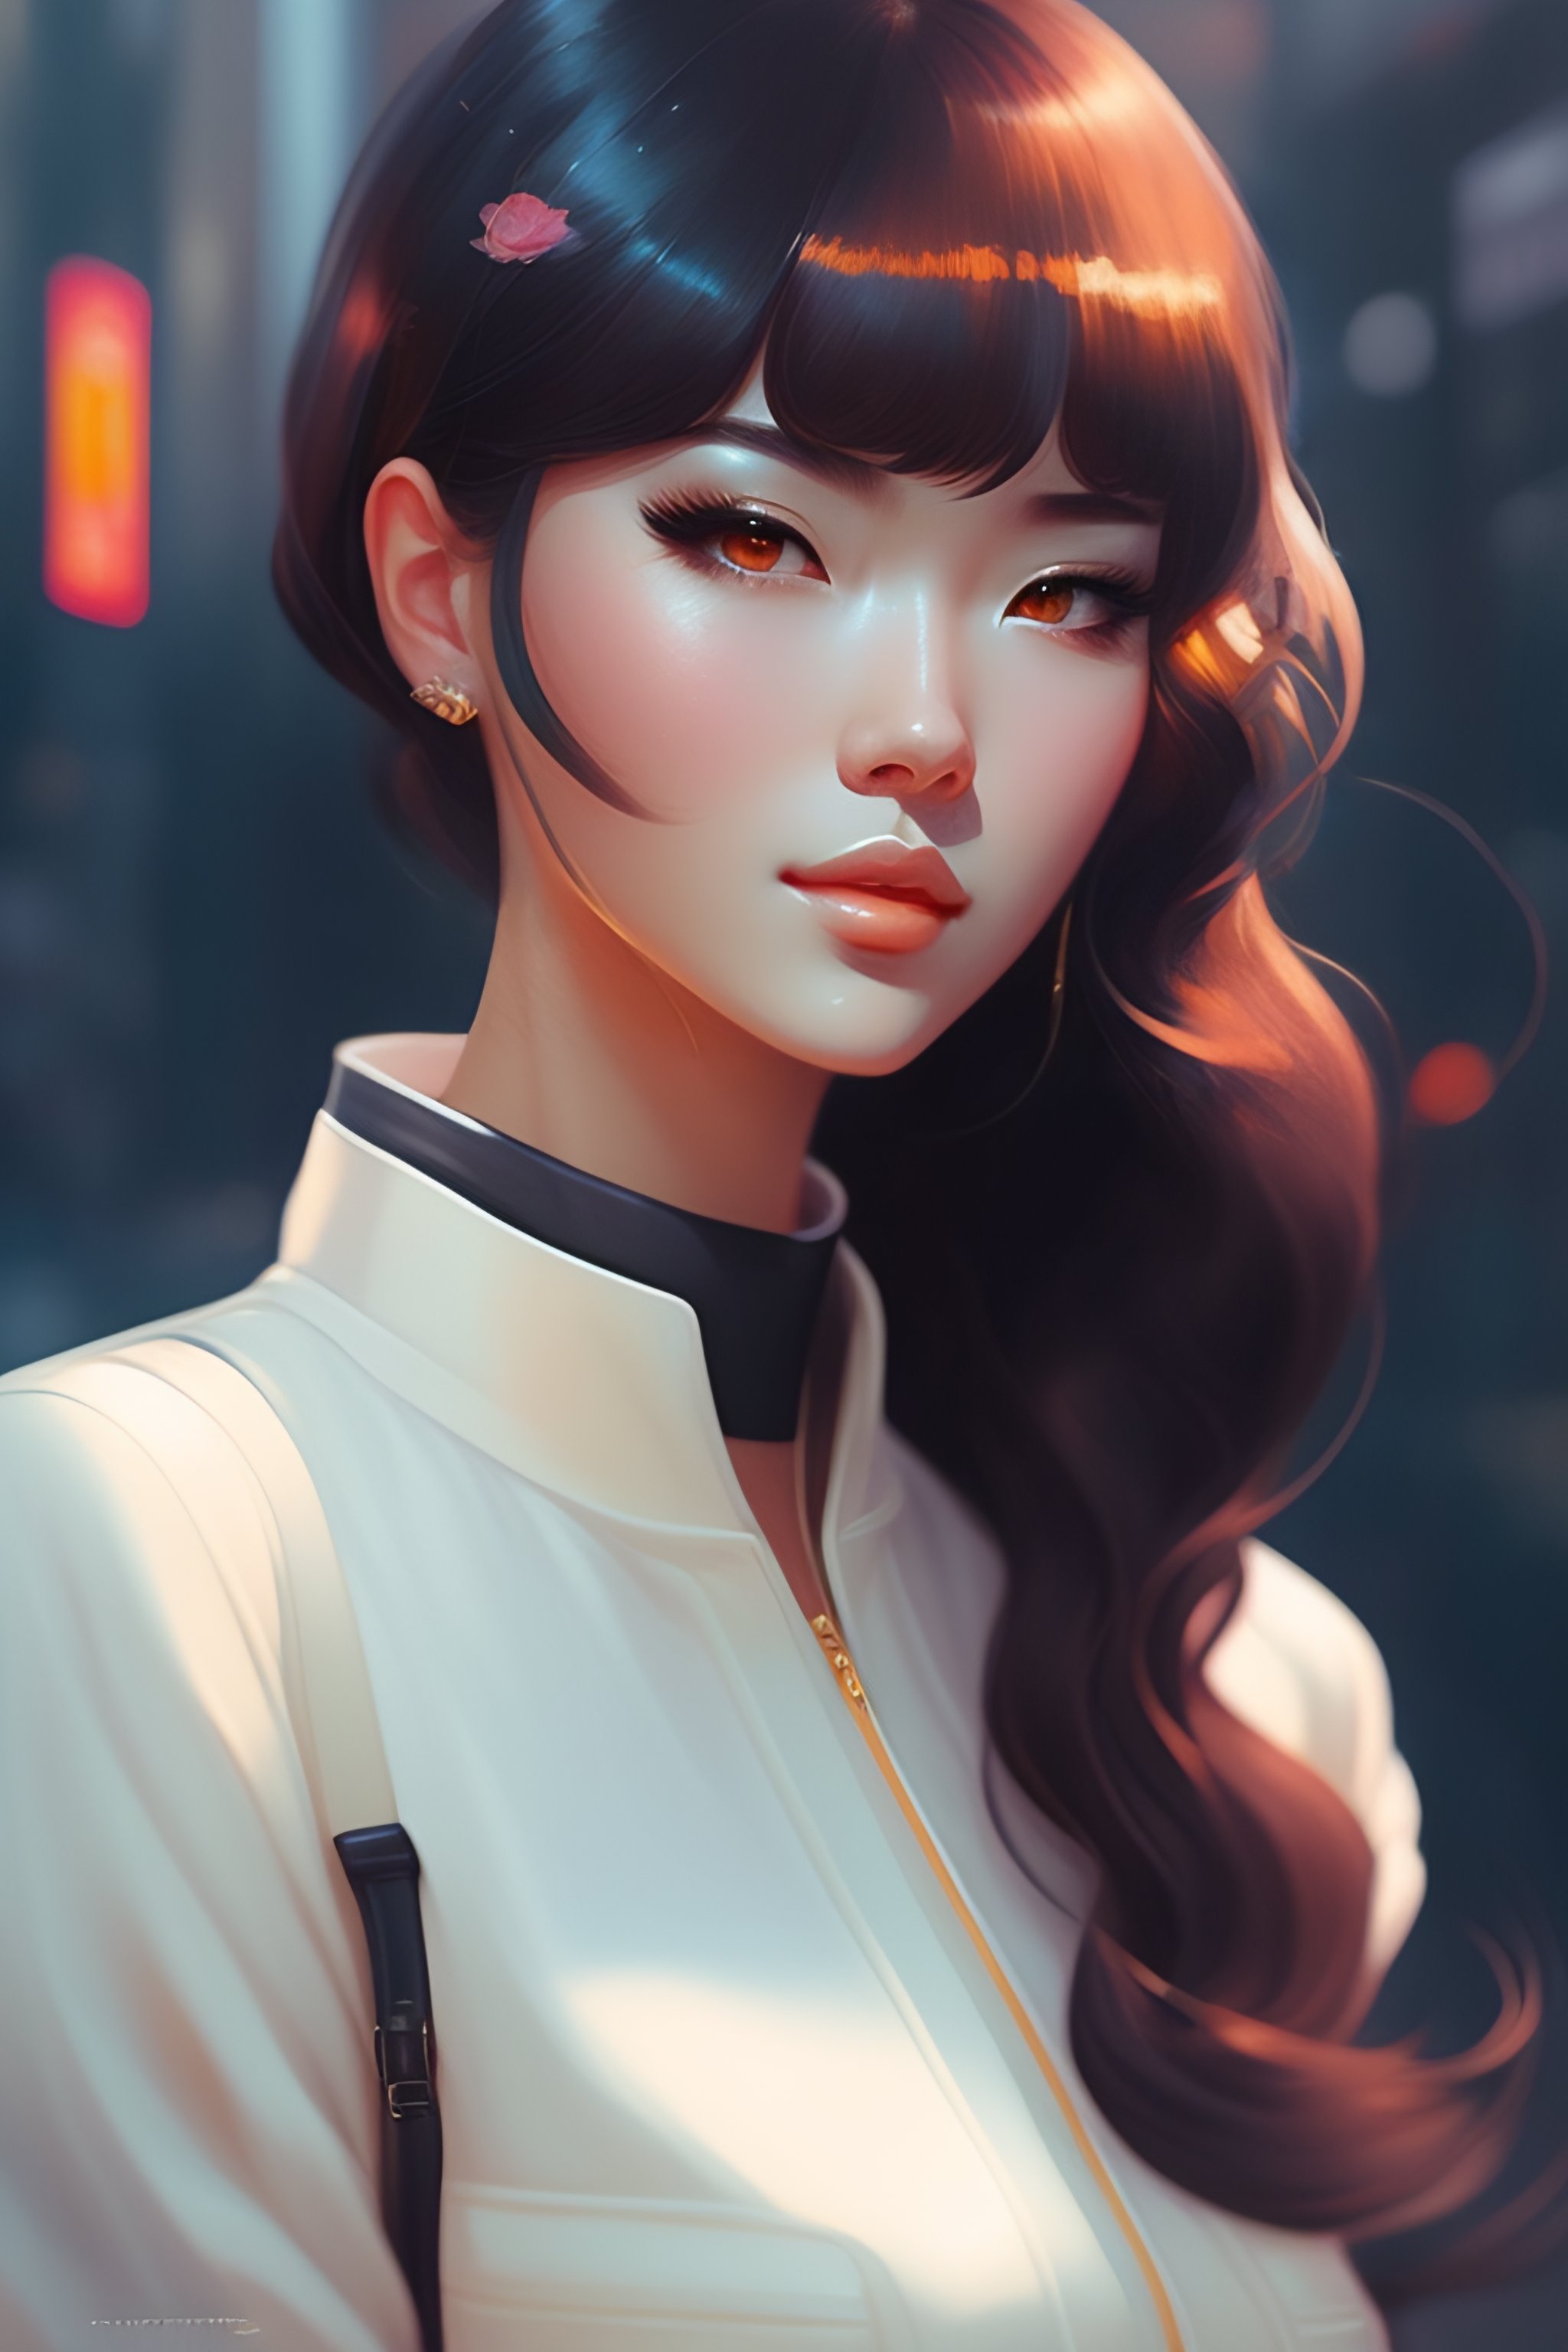 Lexica Elegant Girl In Urban Outfit Cute Fine Face Rounded Eyes Digital Painting Fan Art